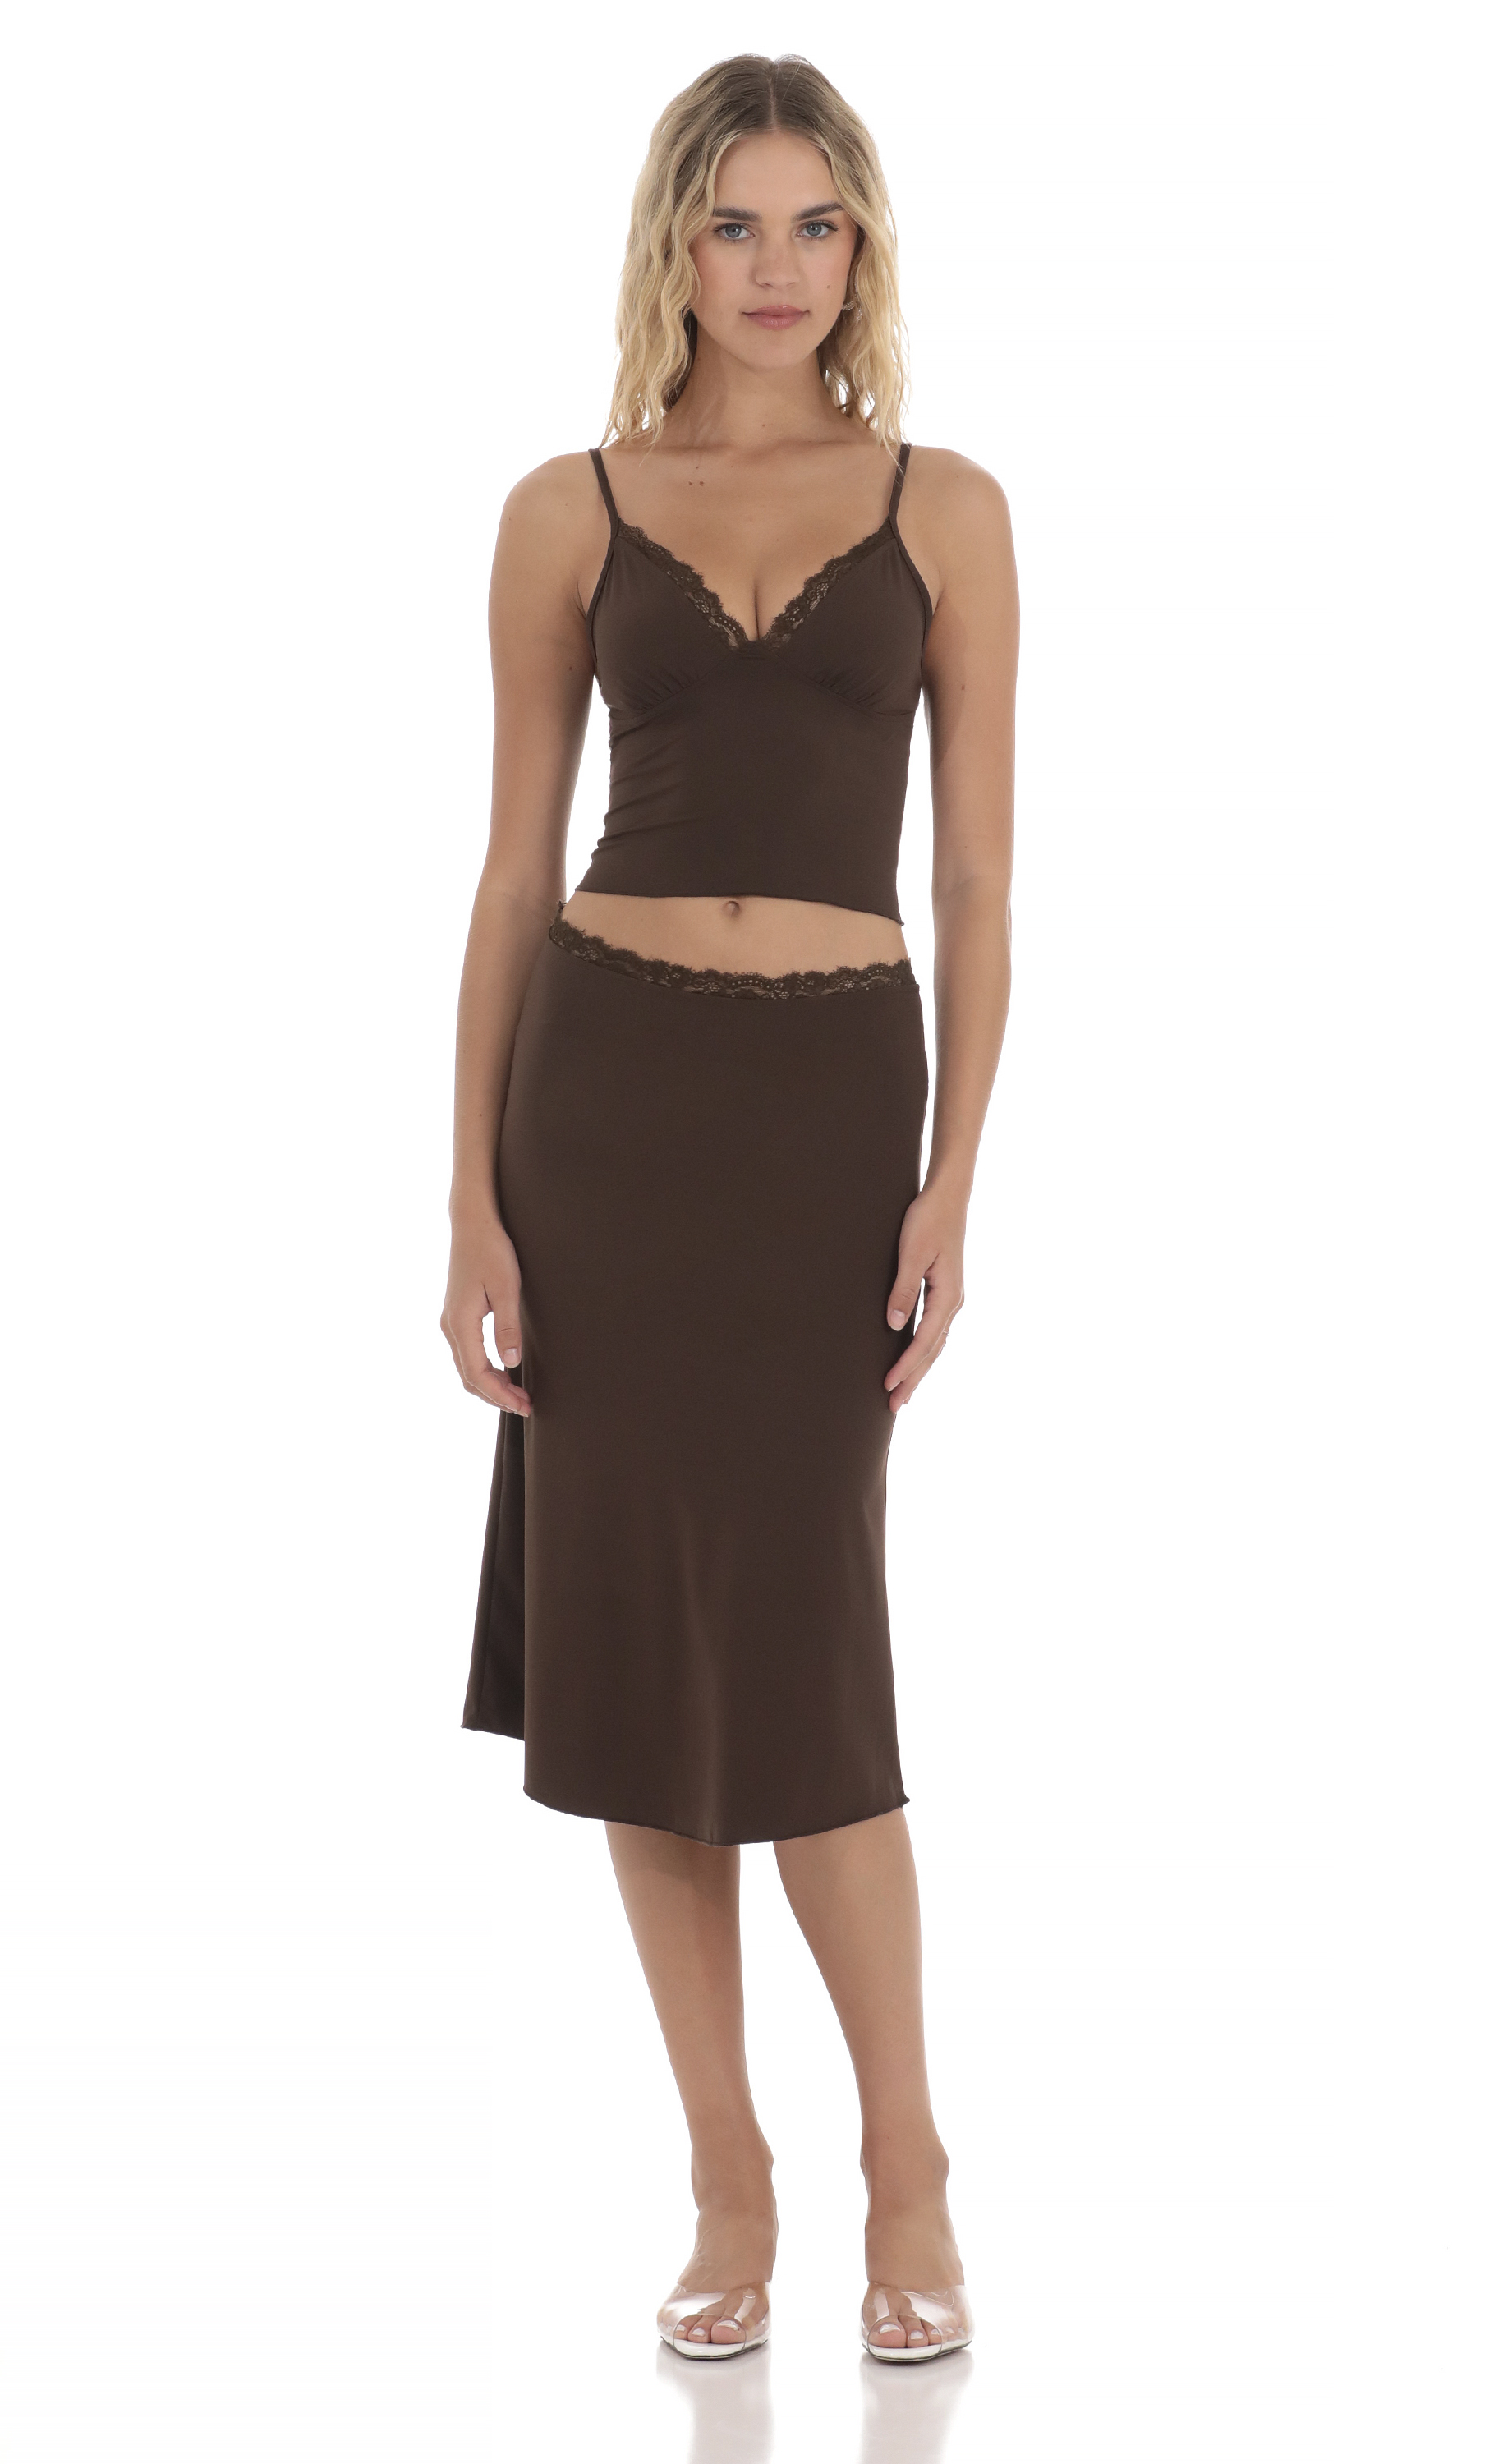 Lace Trim Two Piece Set in Brown